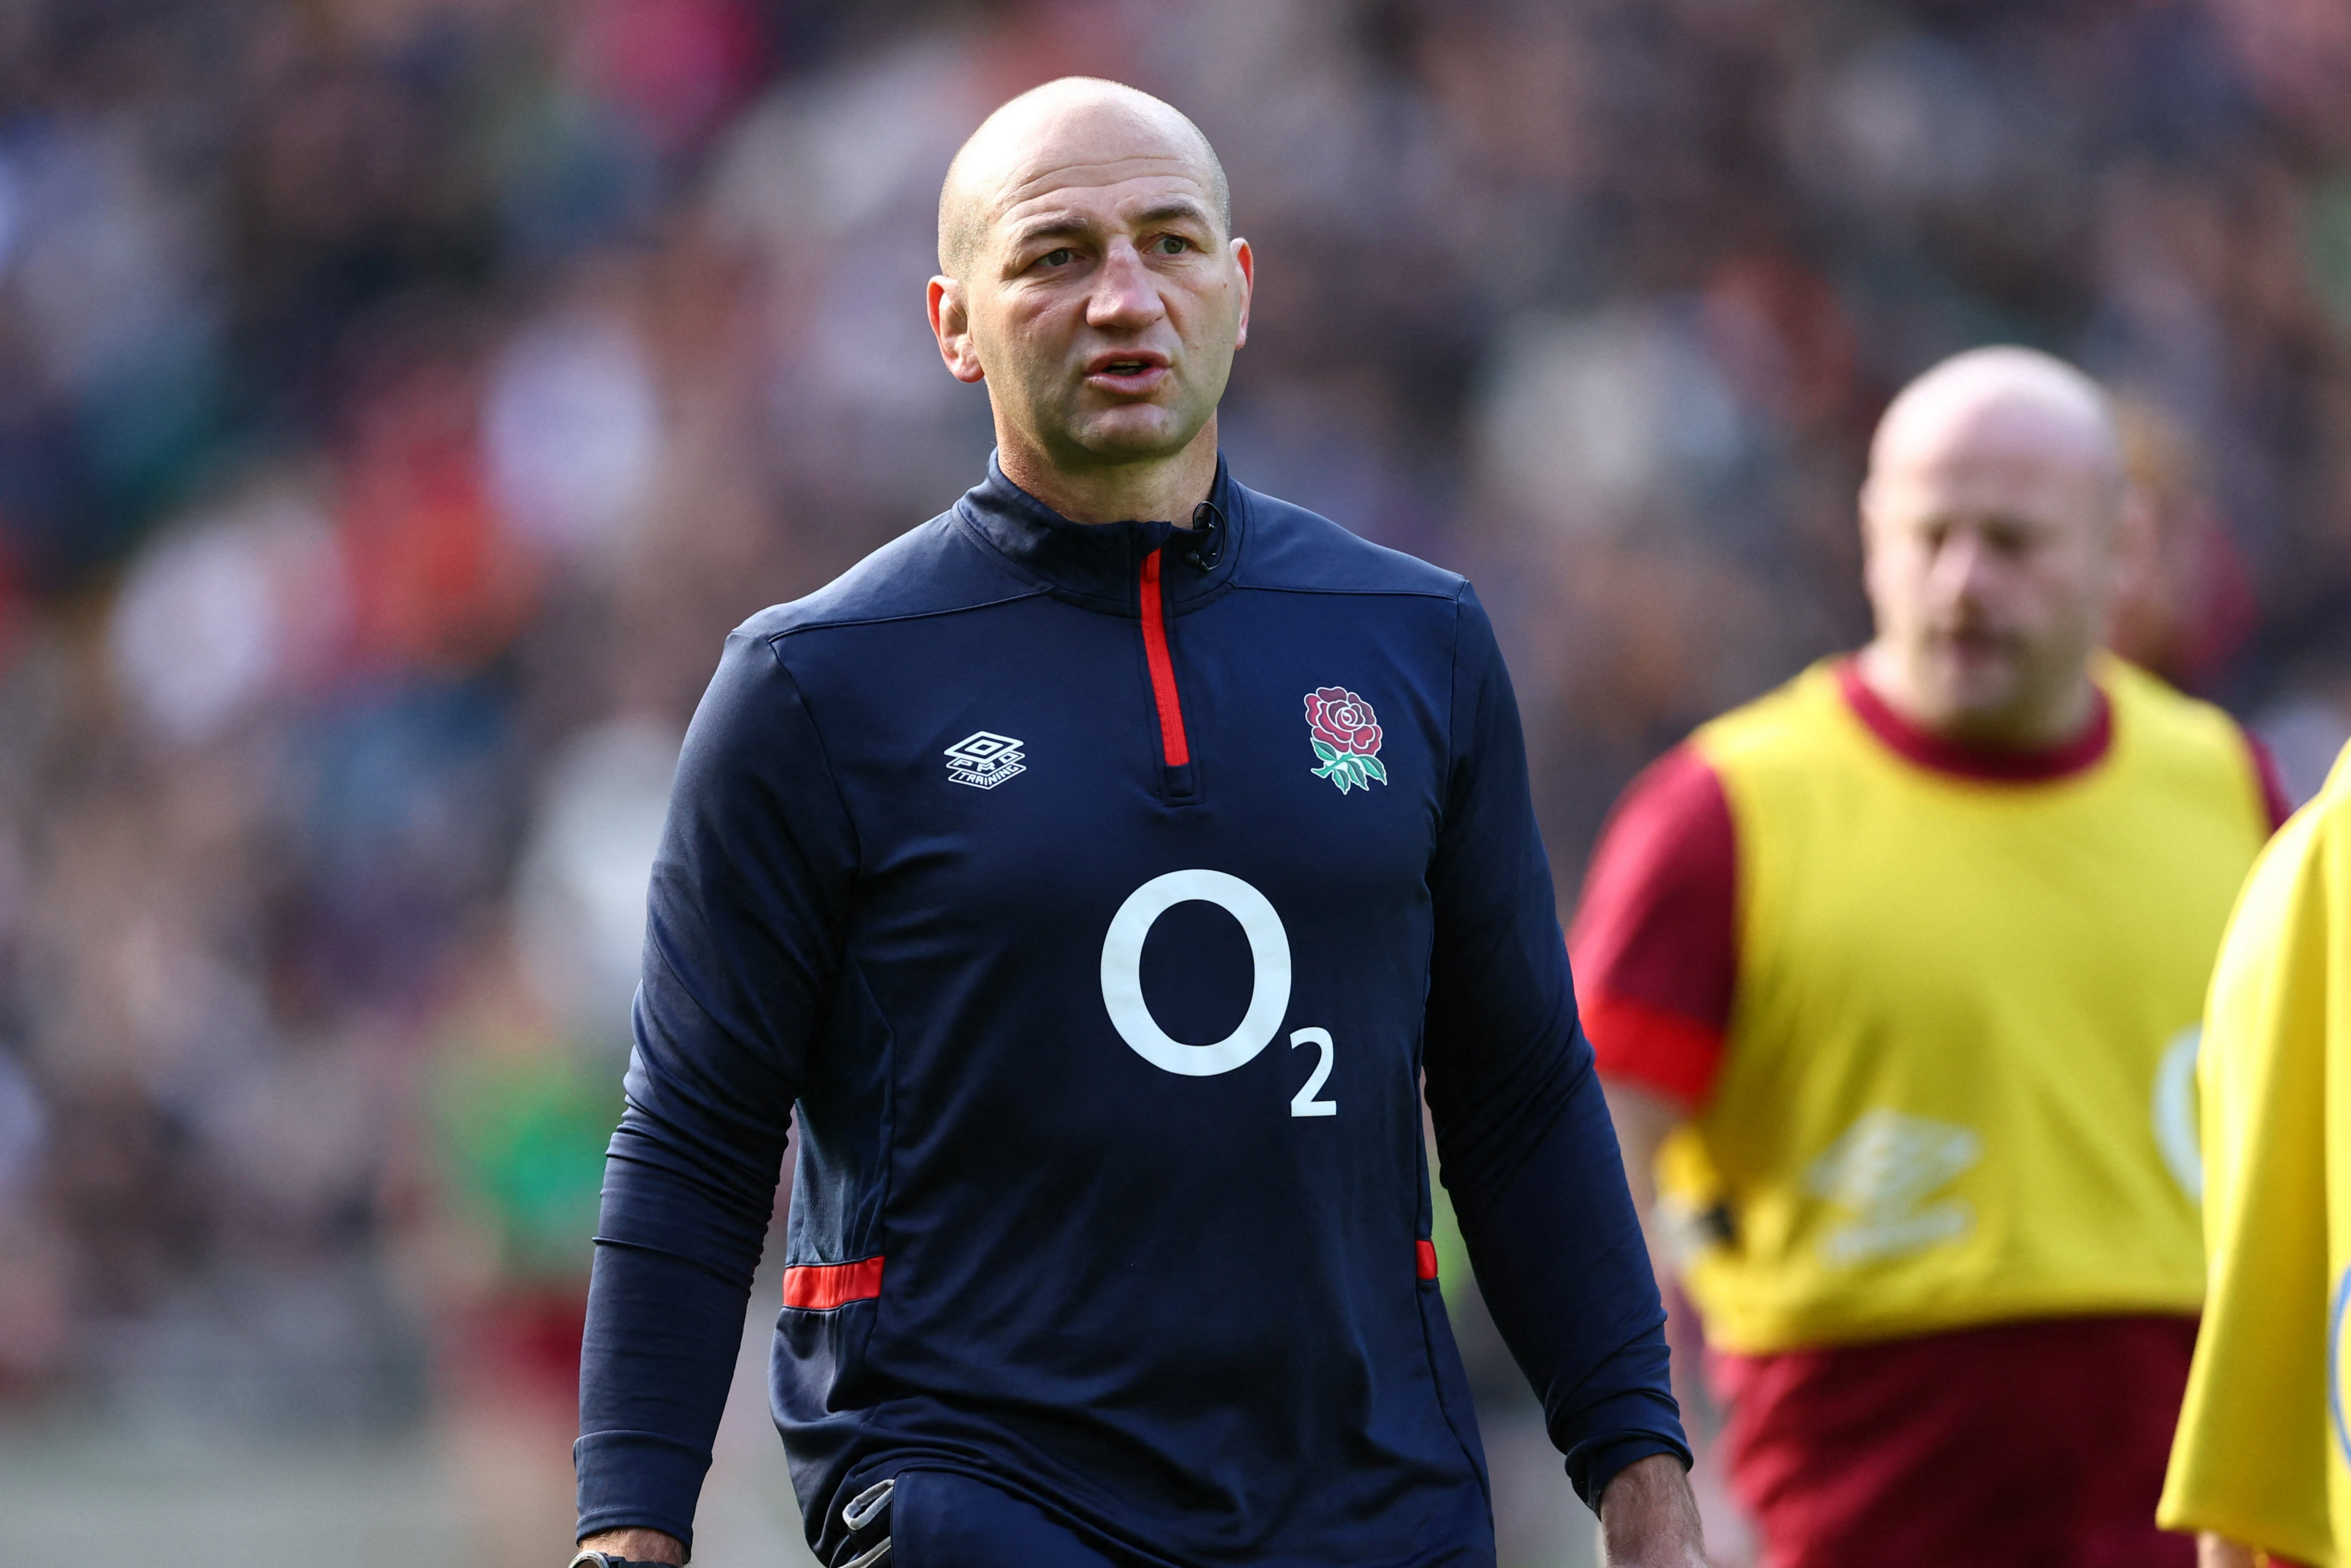 Steve Borthwick has been frustrated about the lack of communication between Premiership clubs and England